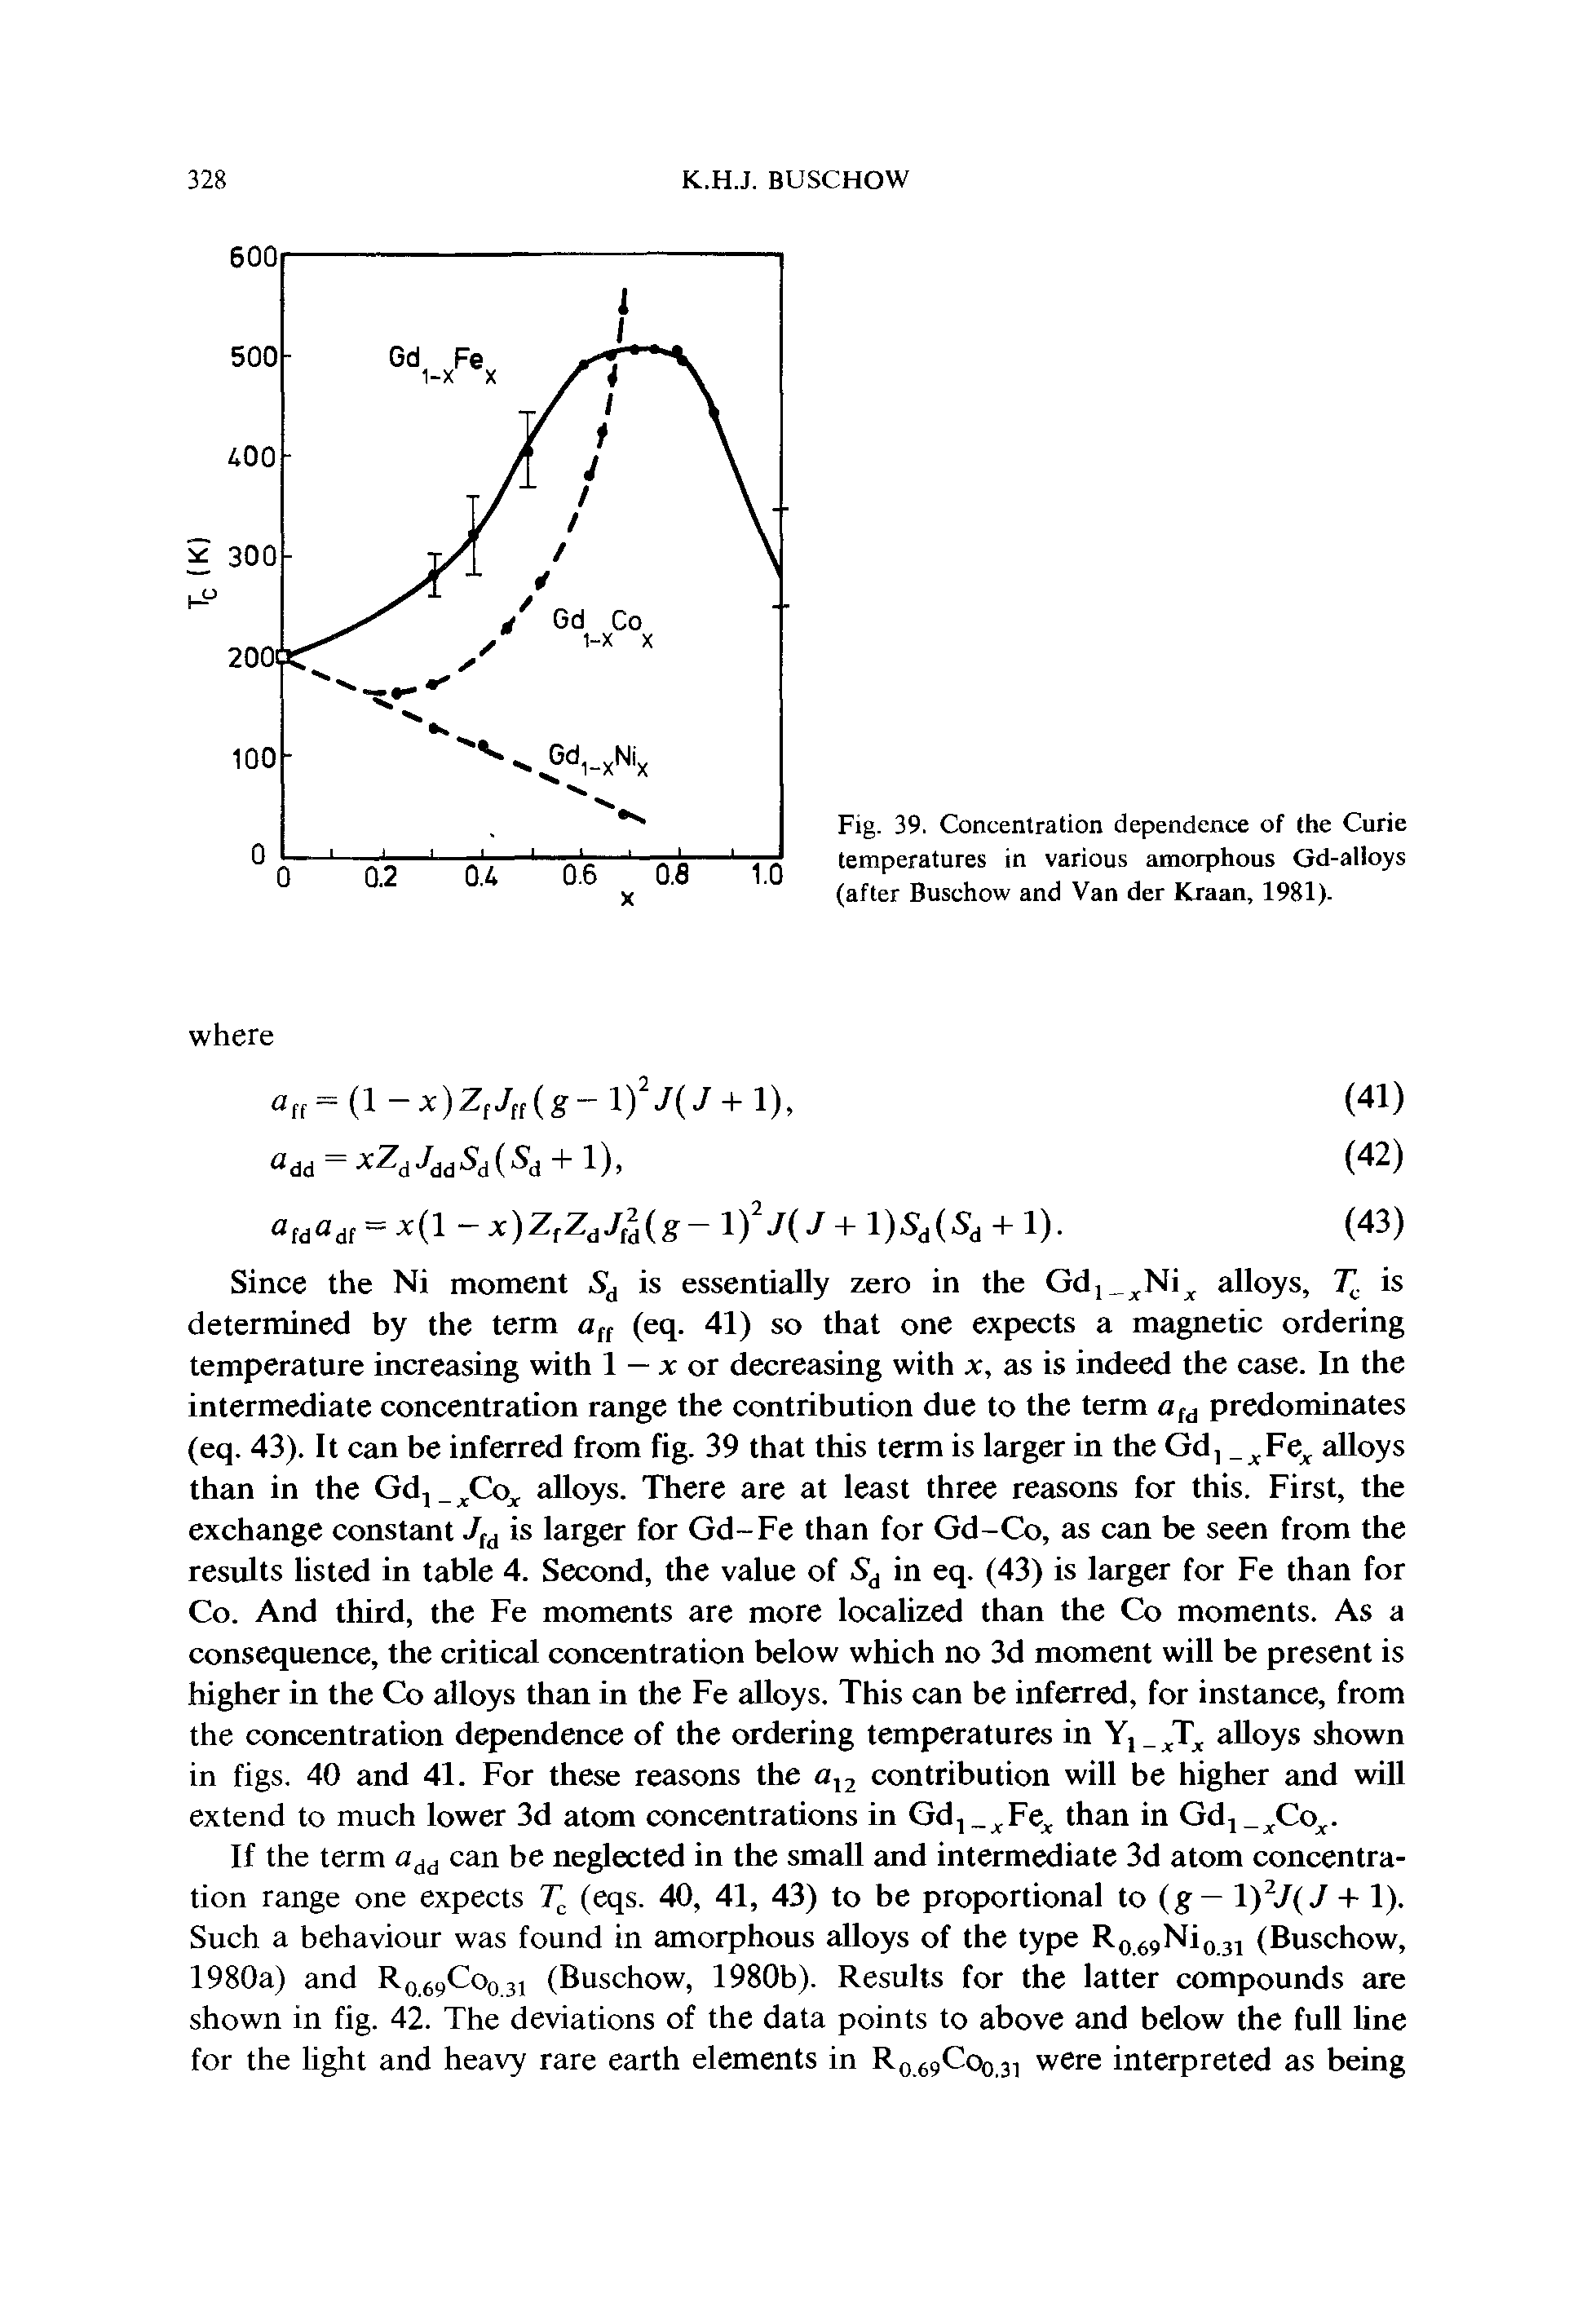 Fig. 39. Concentration dependence of the Curie temperatures in various amorphous Gd-alloys (after Buschow and Van der Kraan, 1981).